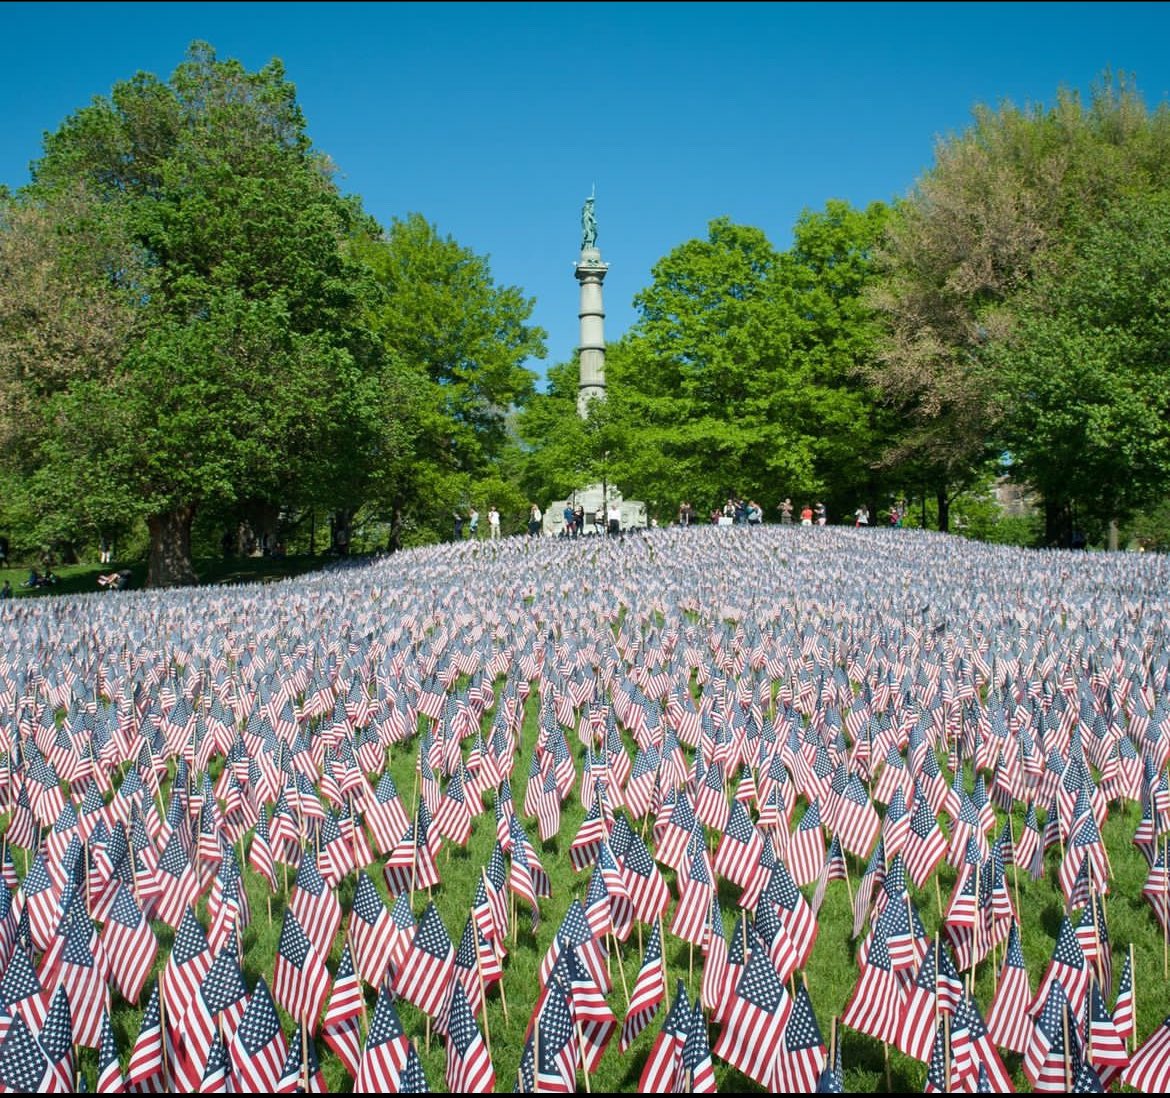 Today—and every day—we remember and honor those who died in service to #America. #MemorialDay #sacrifice @MAWorkforce @MassLWD @TweetWorcester @CentralMATweets @MassEOVS @DeptVetAffairs